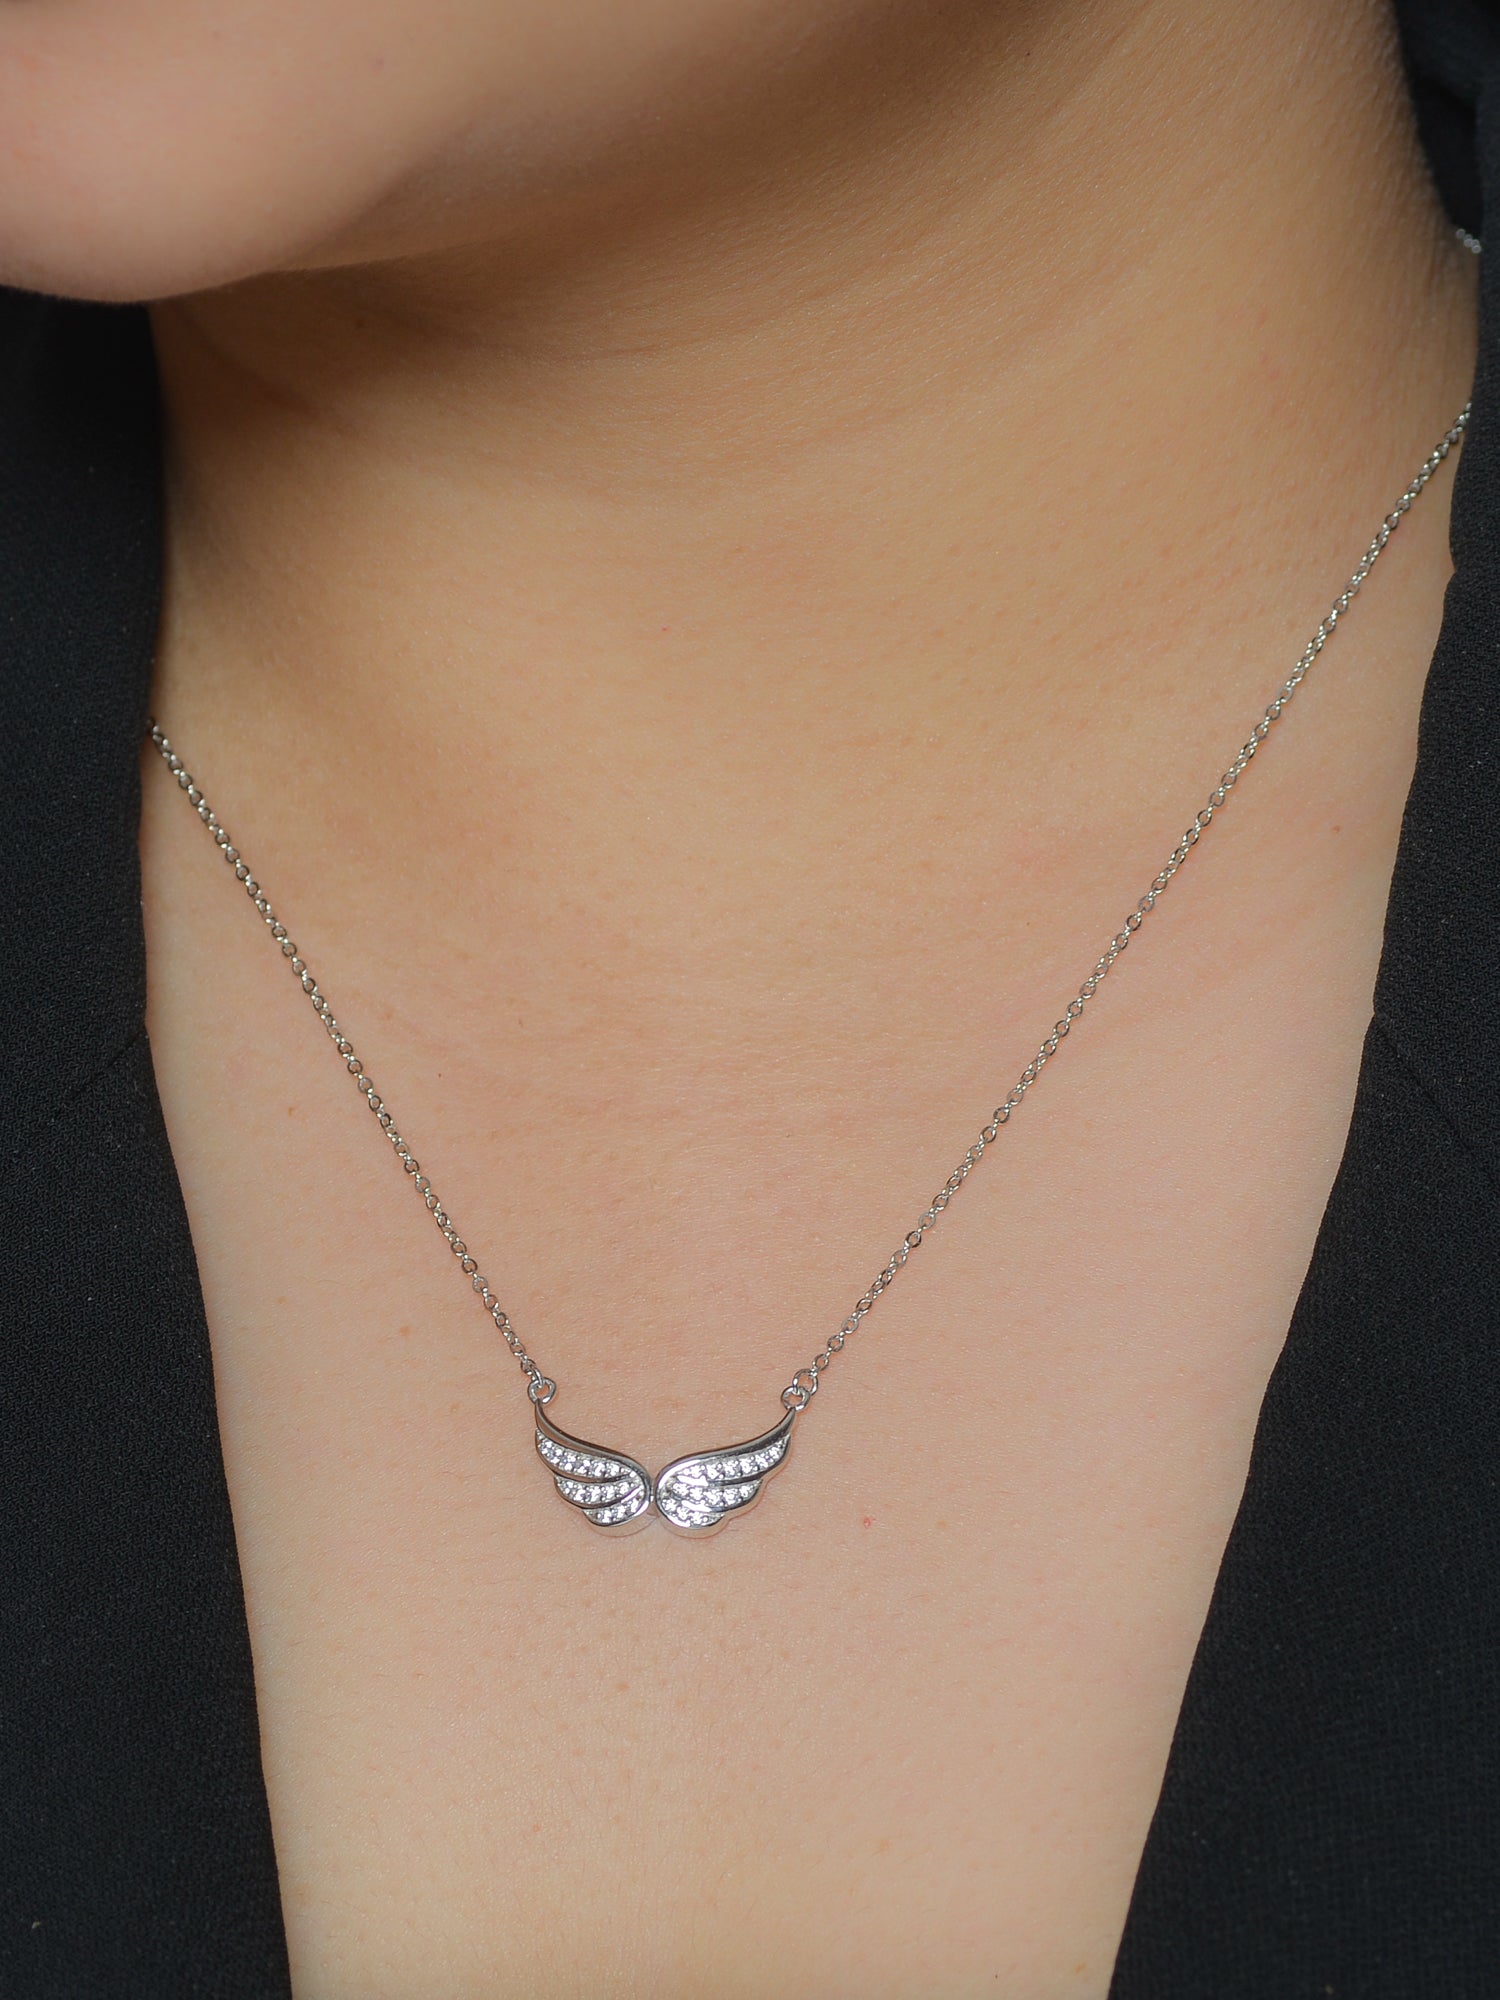 SILVER ANGEL WINGS NECKLACE IN AMERICAN DIAMOND AT ORNATE JEWELS-3